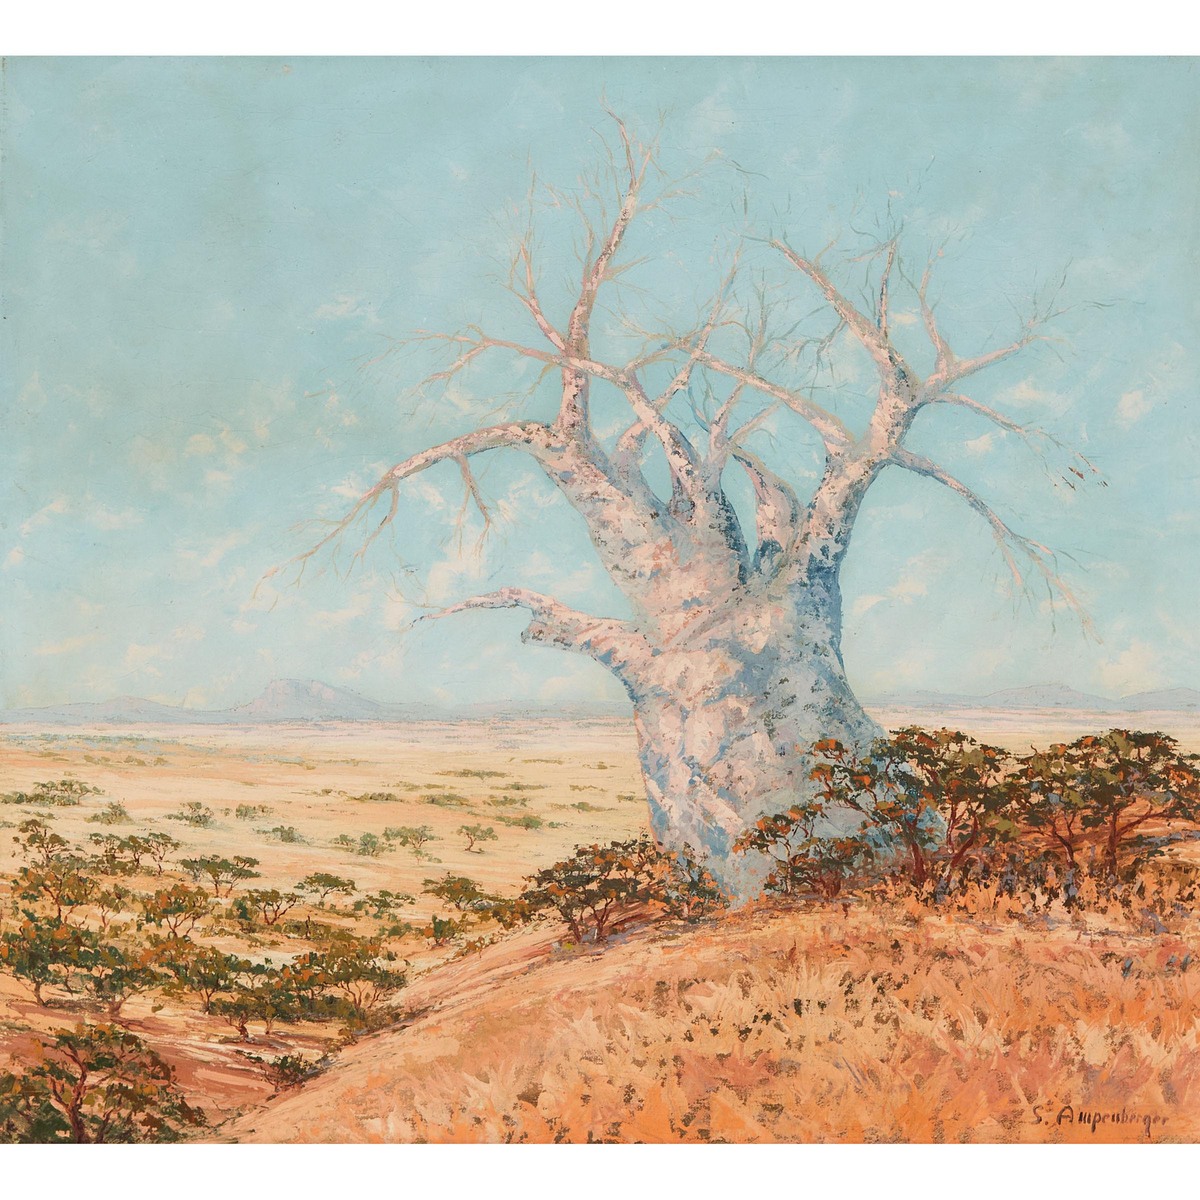 Stefan Ampenberger (1908-1983), THE BAOBAB TREE, signed lower right, 29.7 x 32.4 in — 75.4 x 82.2 cm